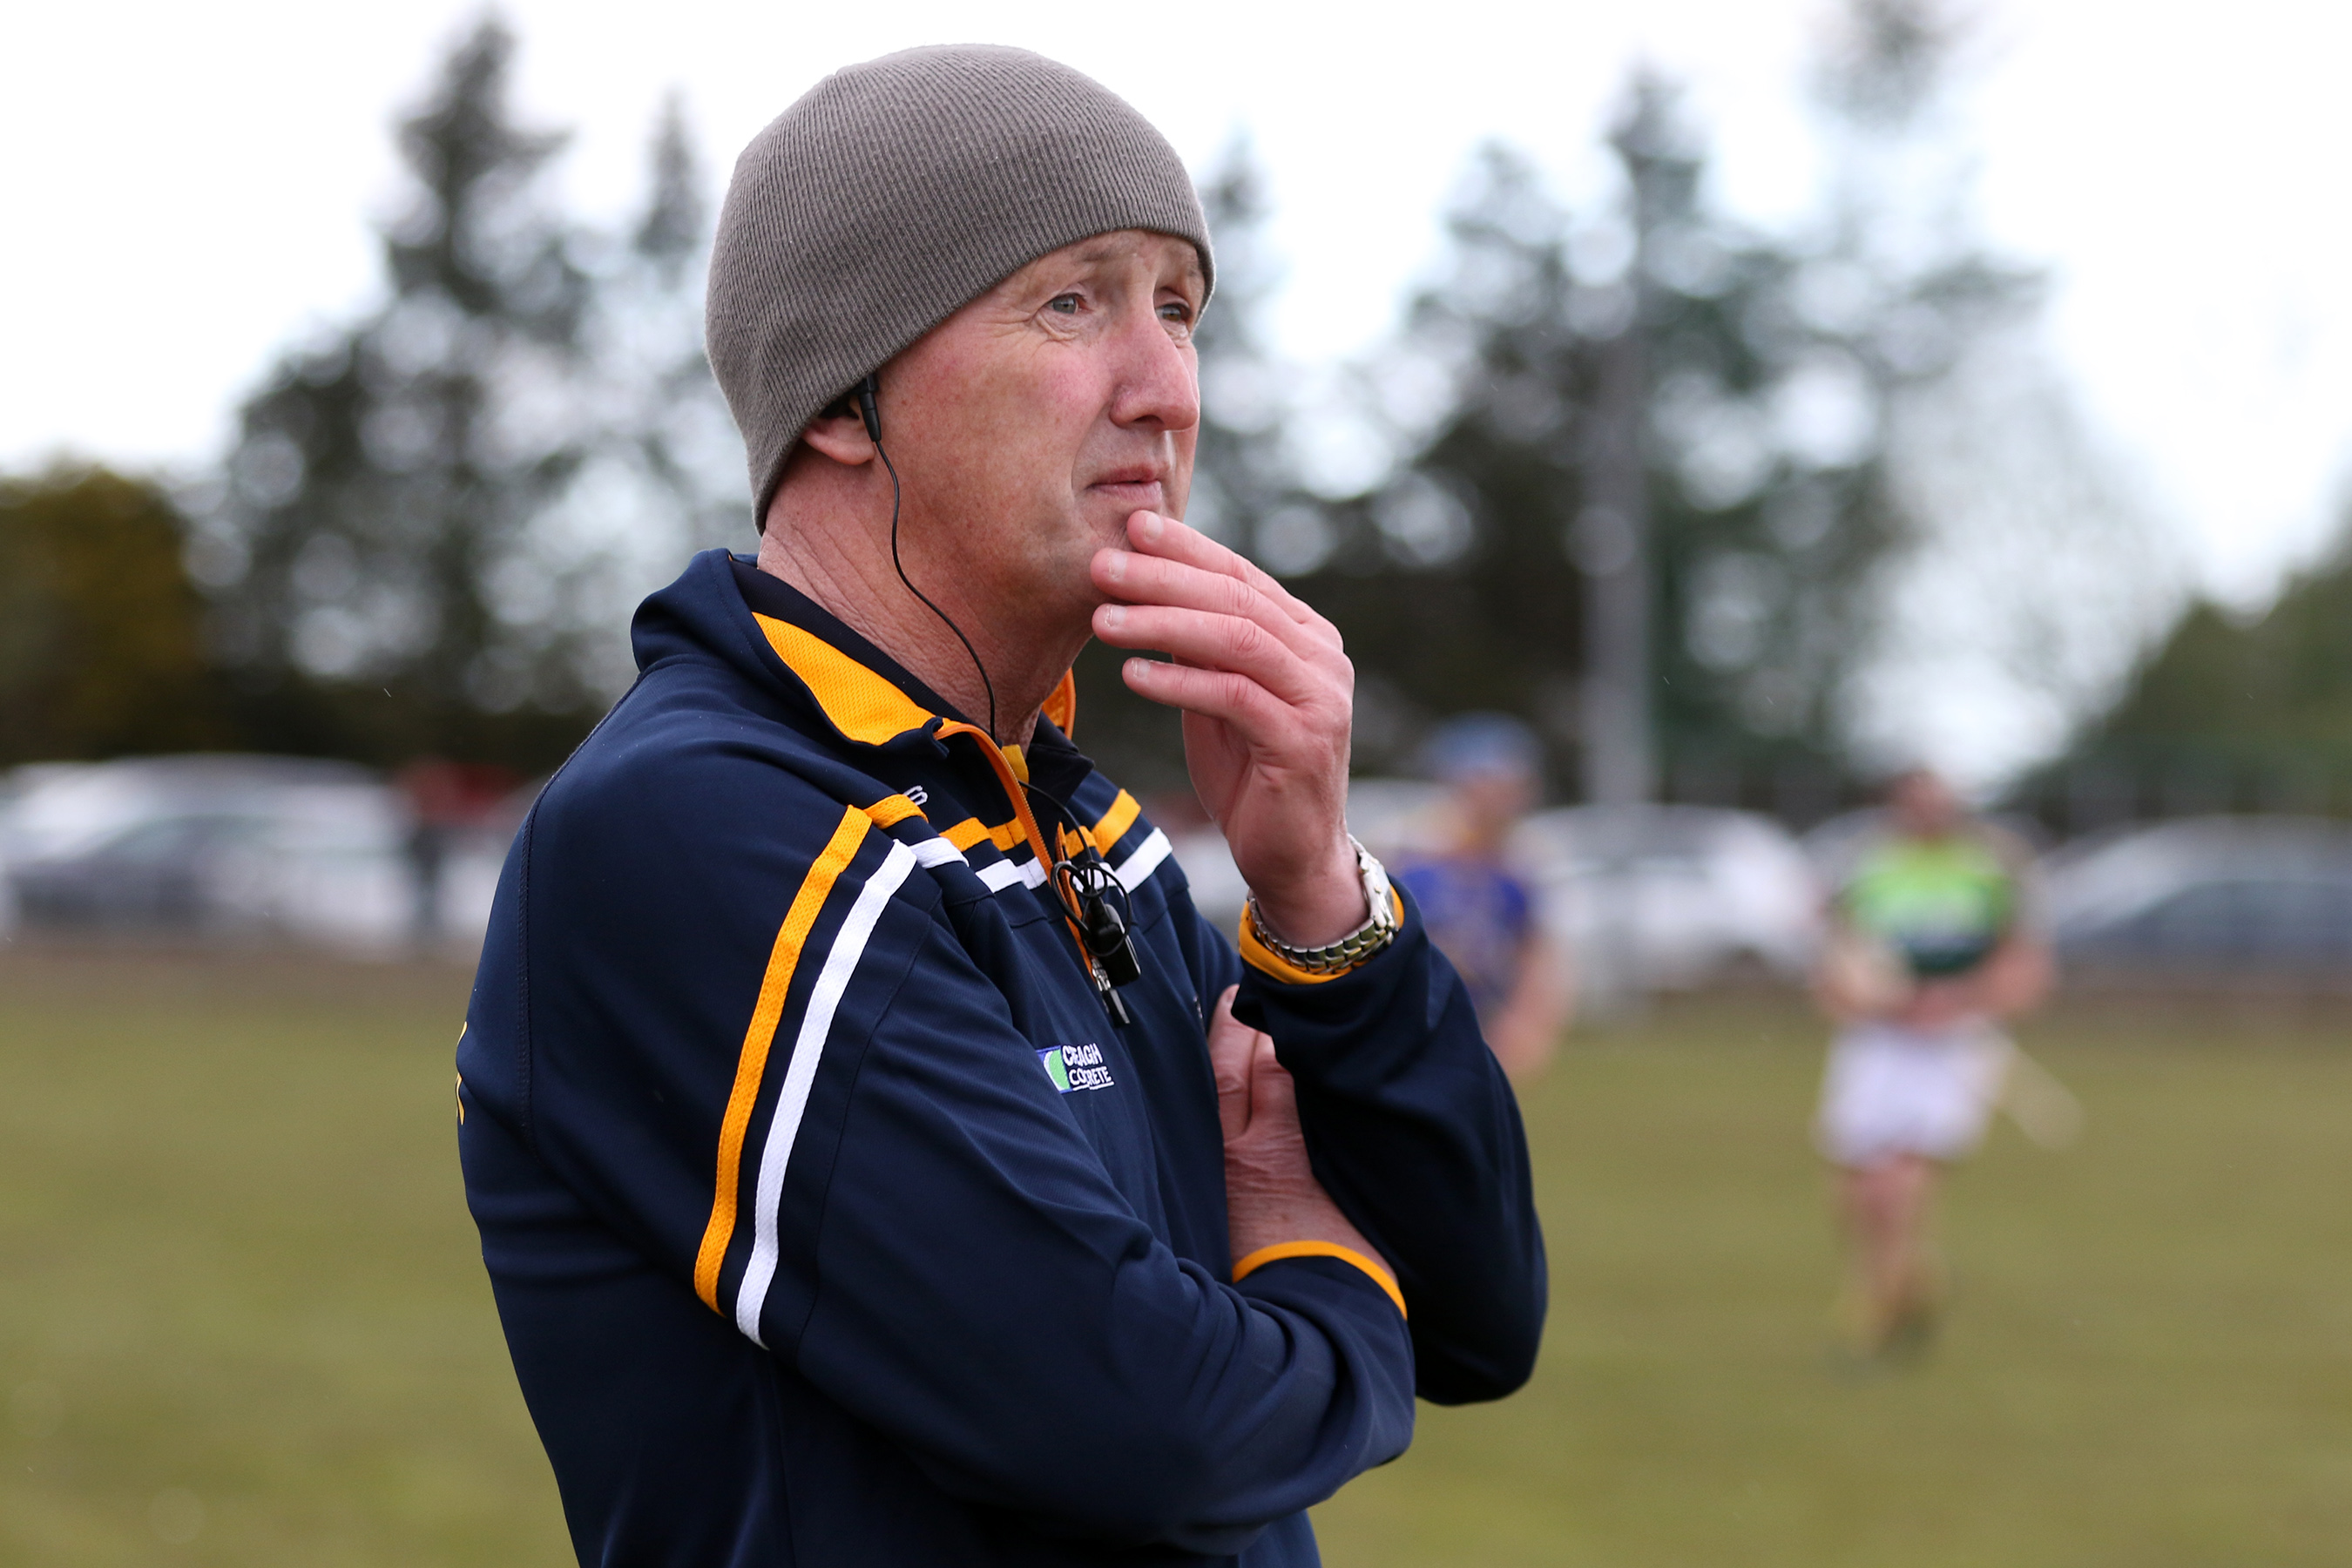 Antrim manager Dominic ‘Woody’ McKinley feels the format of the Ulster Hurling Championship needs to changed after yesterday’s 23-point win over Derry